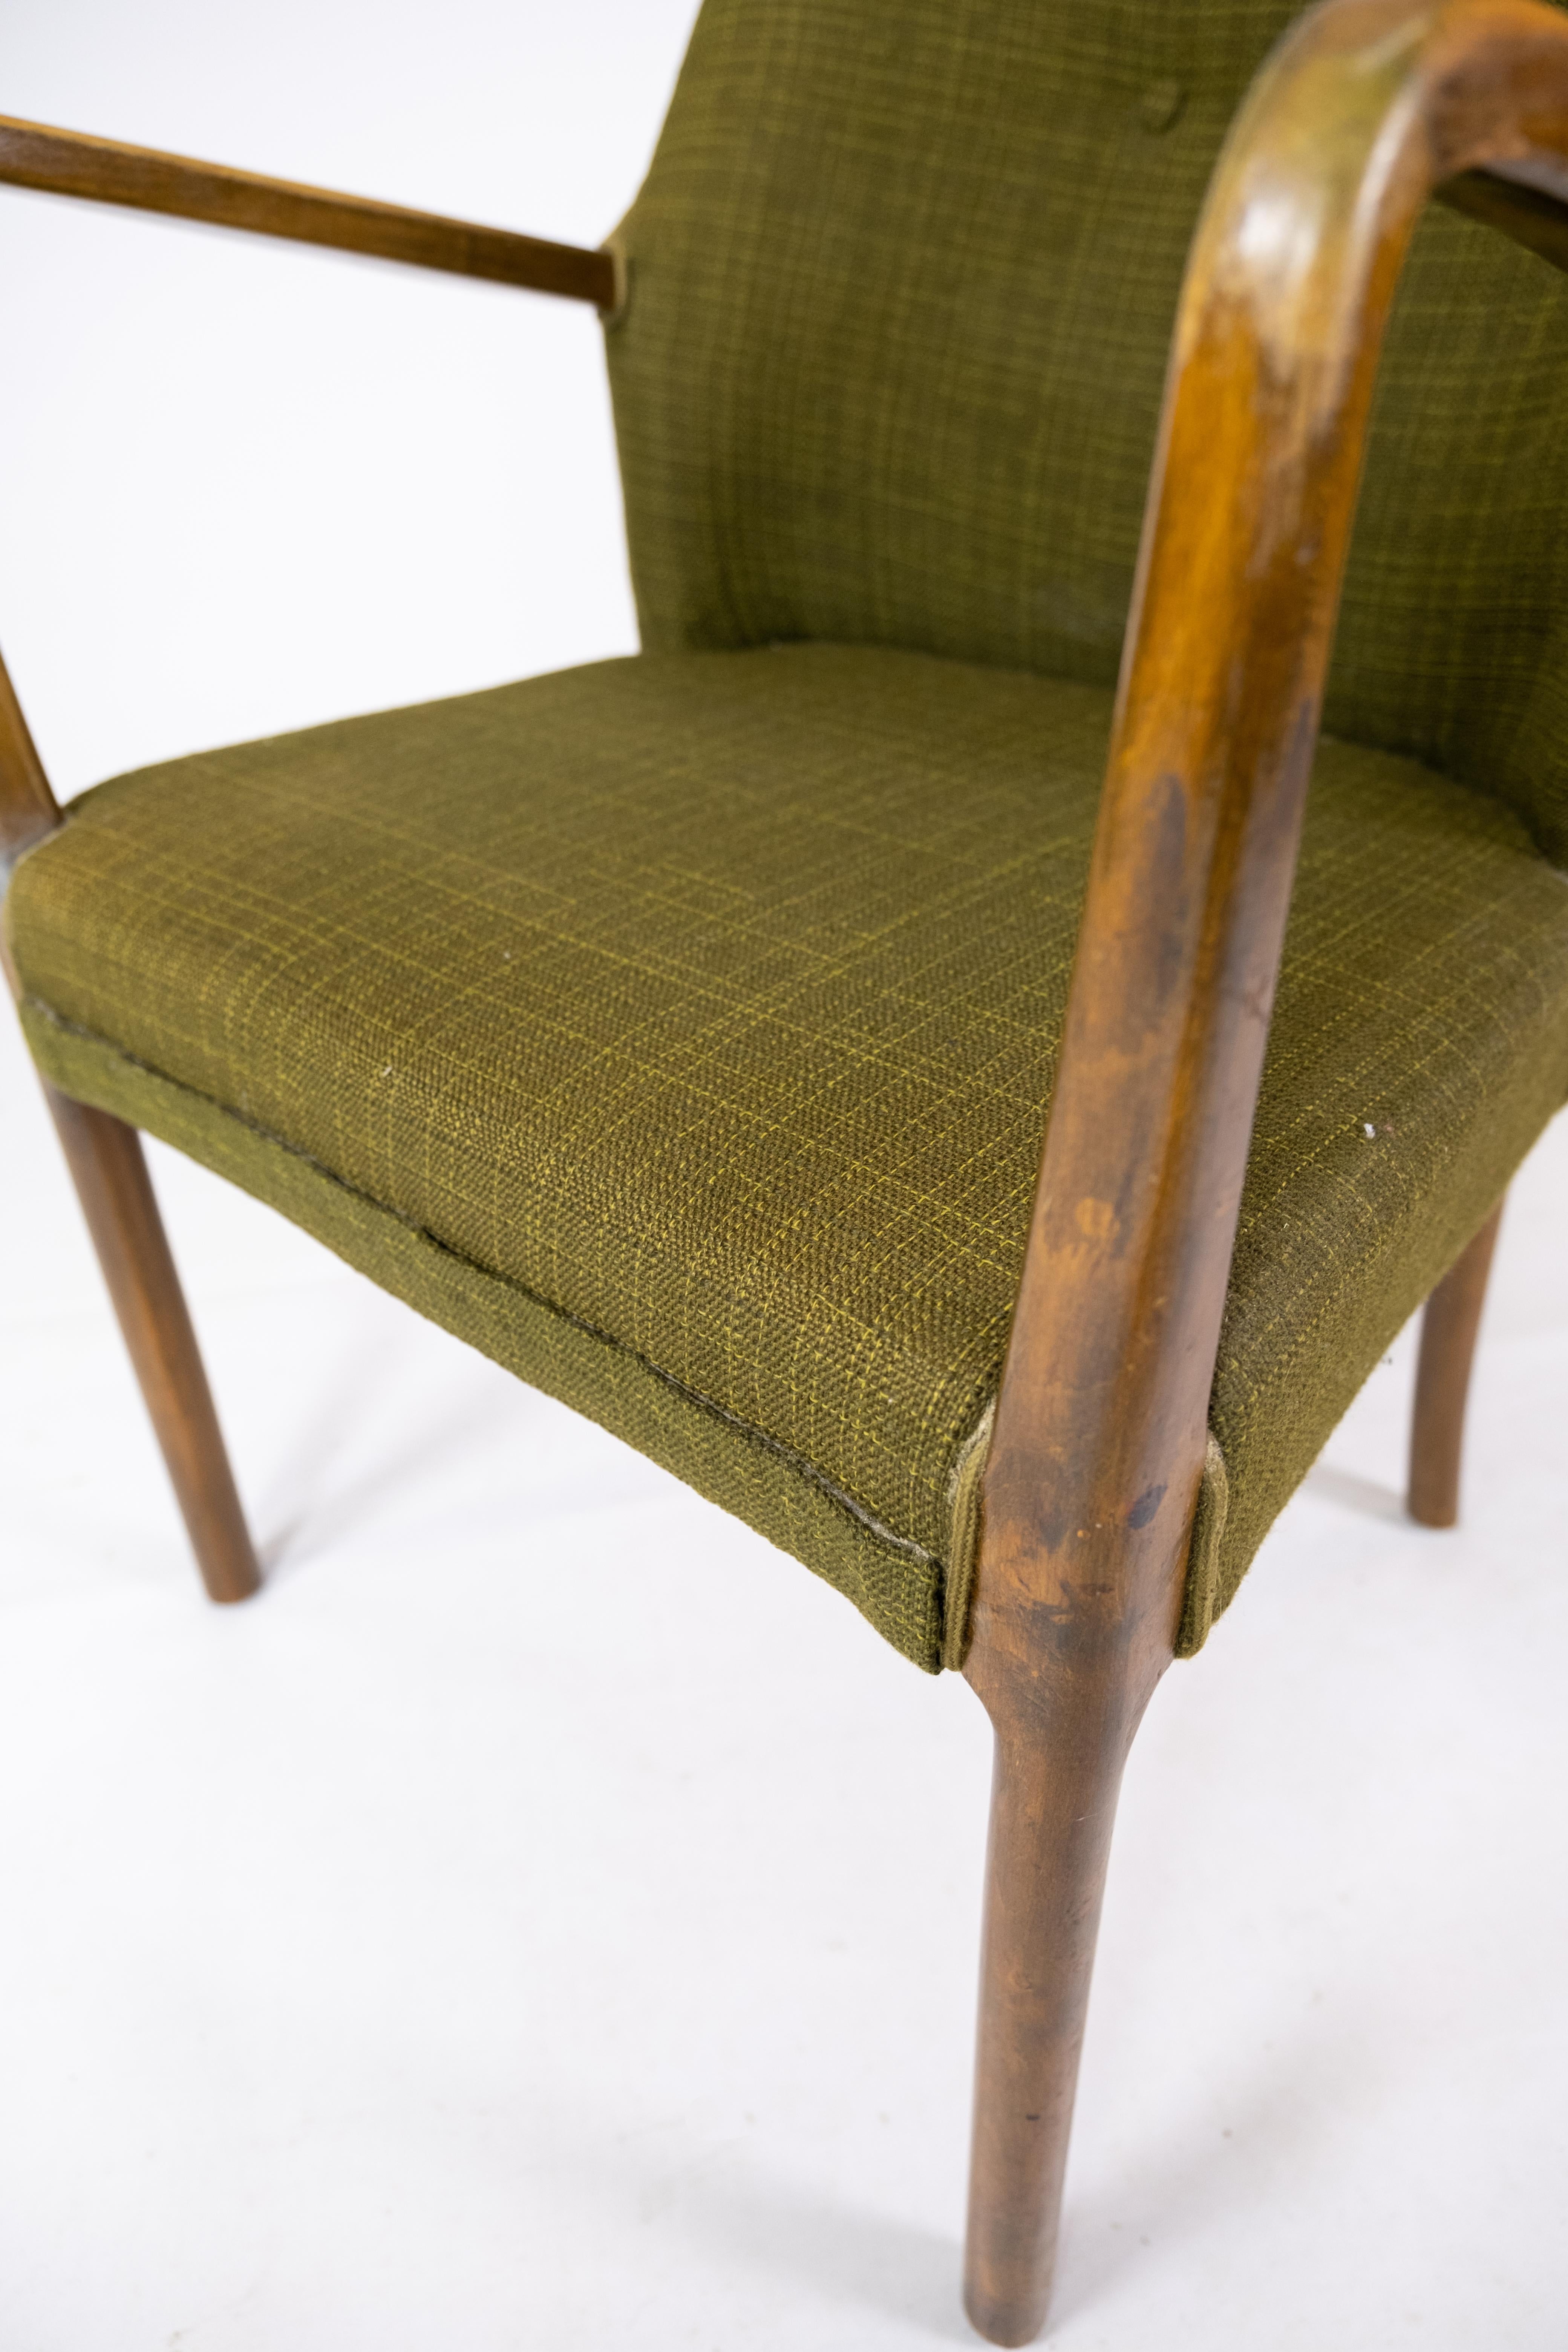 Armchair in Birch and Orginal Dark Green Fabric of Danish Design from the 1950s For Sale 3